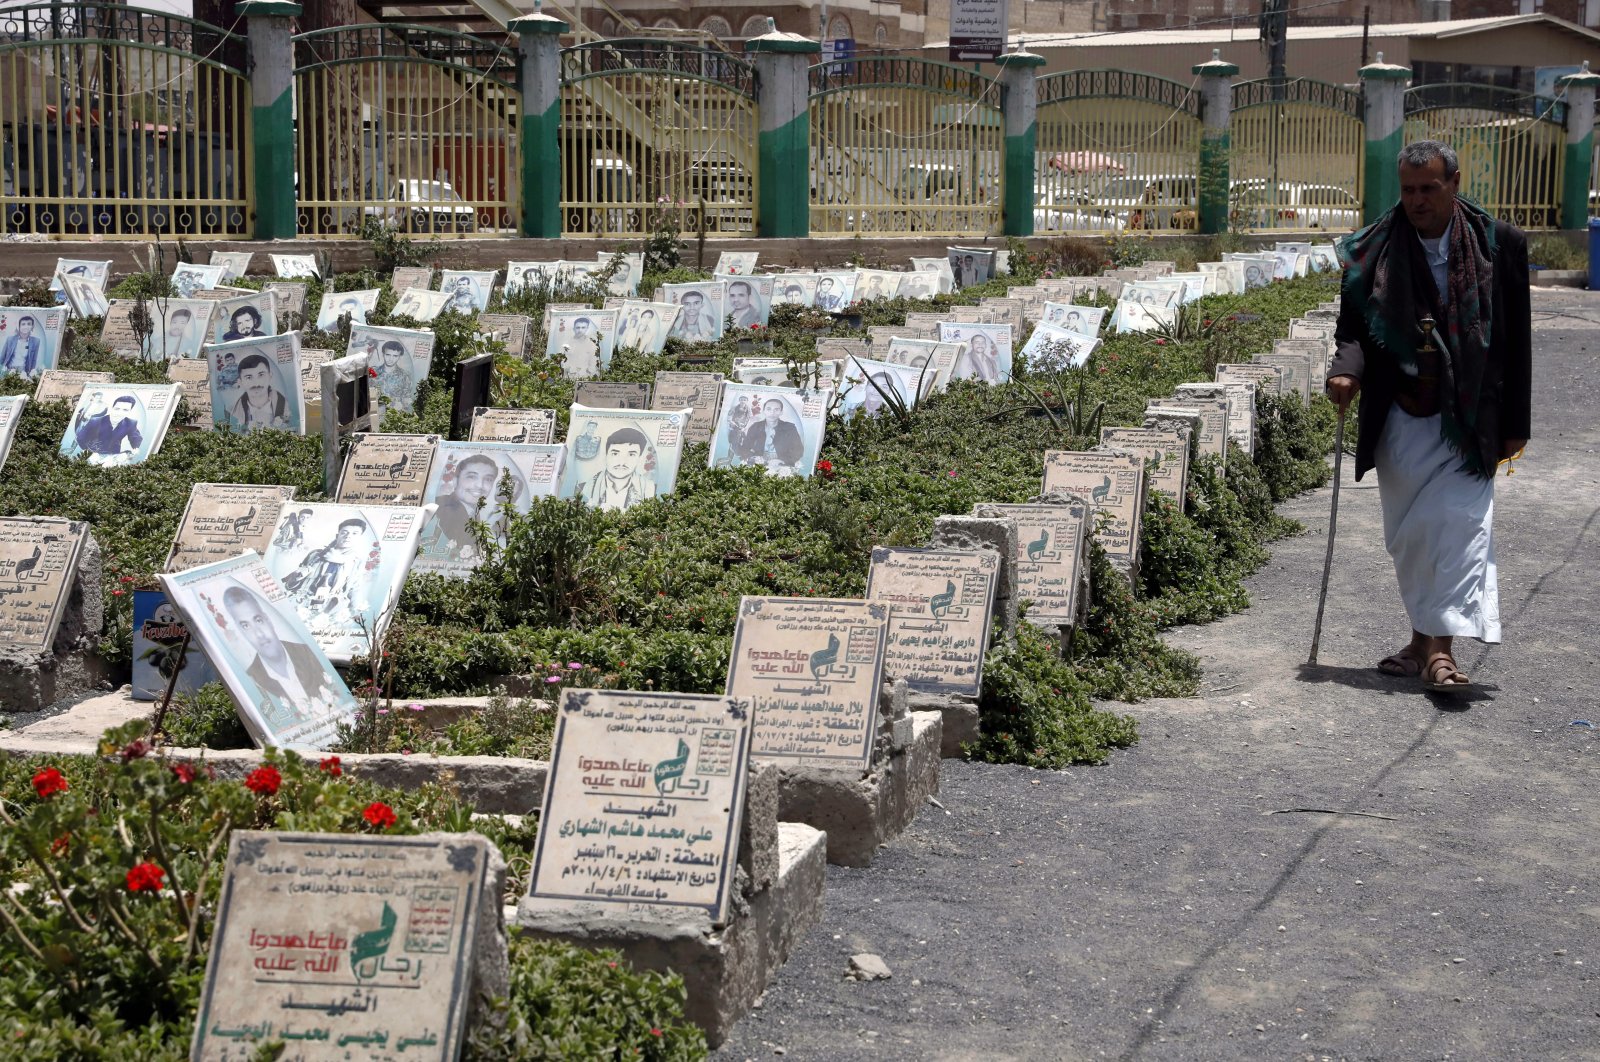 A Yemeni passes portraits on the graves of those who were killed in Yemen’s current war at a cemetery in Sanaa, Yemen, May 28, 2022. (EPA Photo)